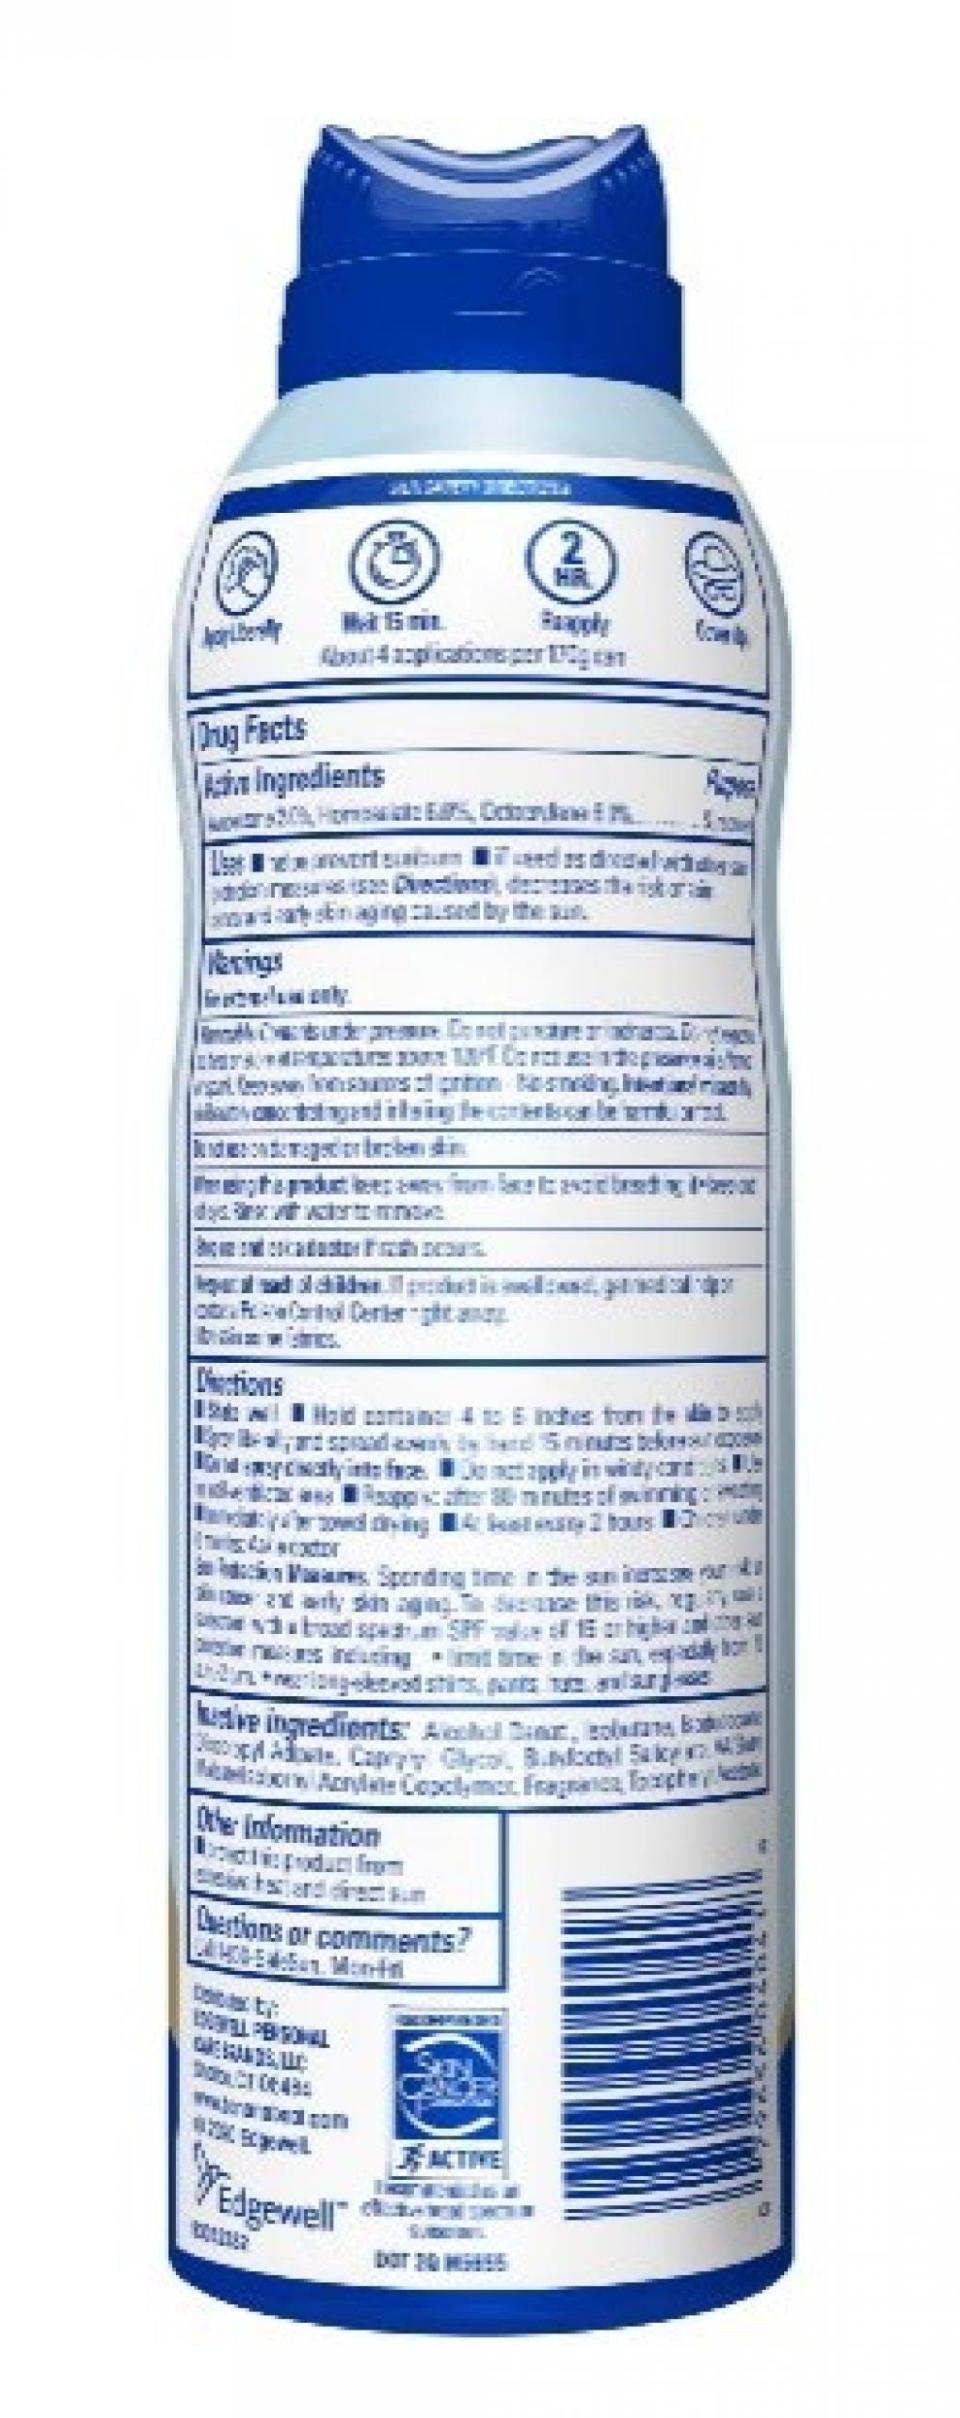 Banana Boat added a third batch to a 2022 recall of its hair and scalp sunscreen.